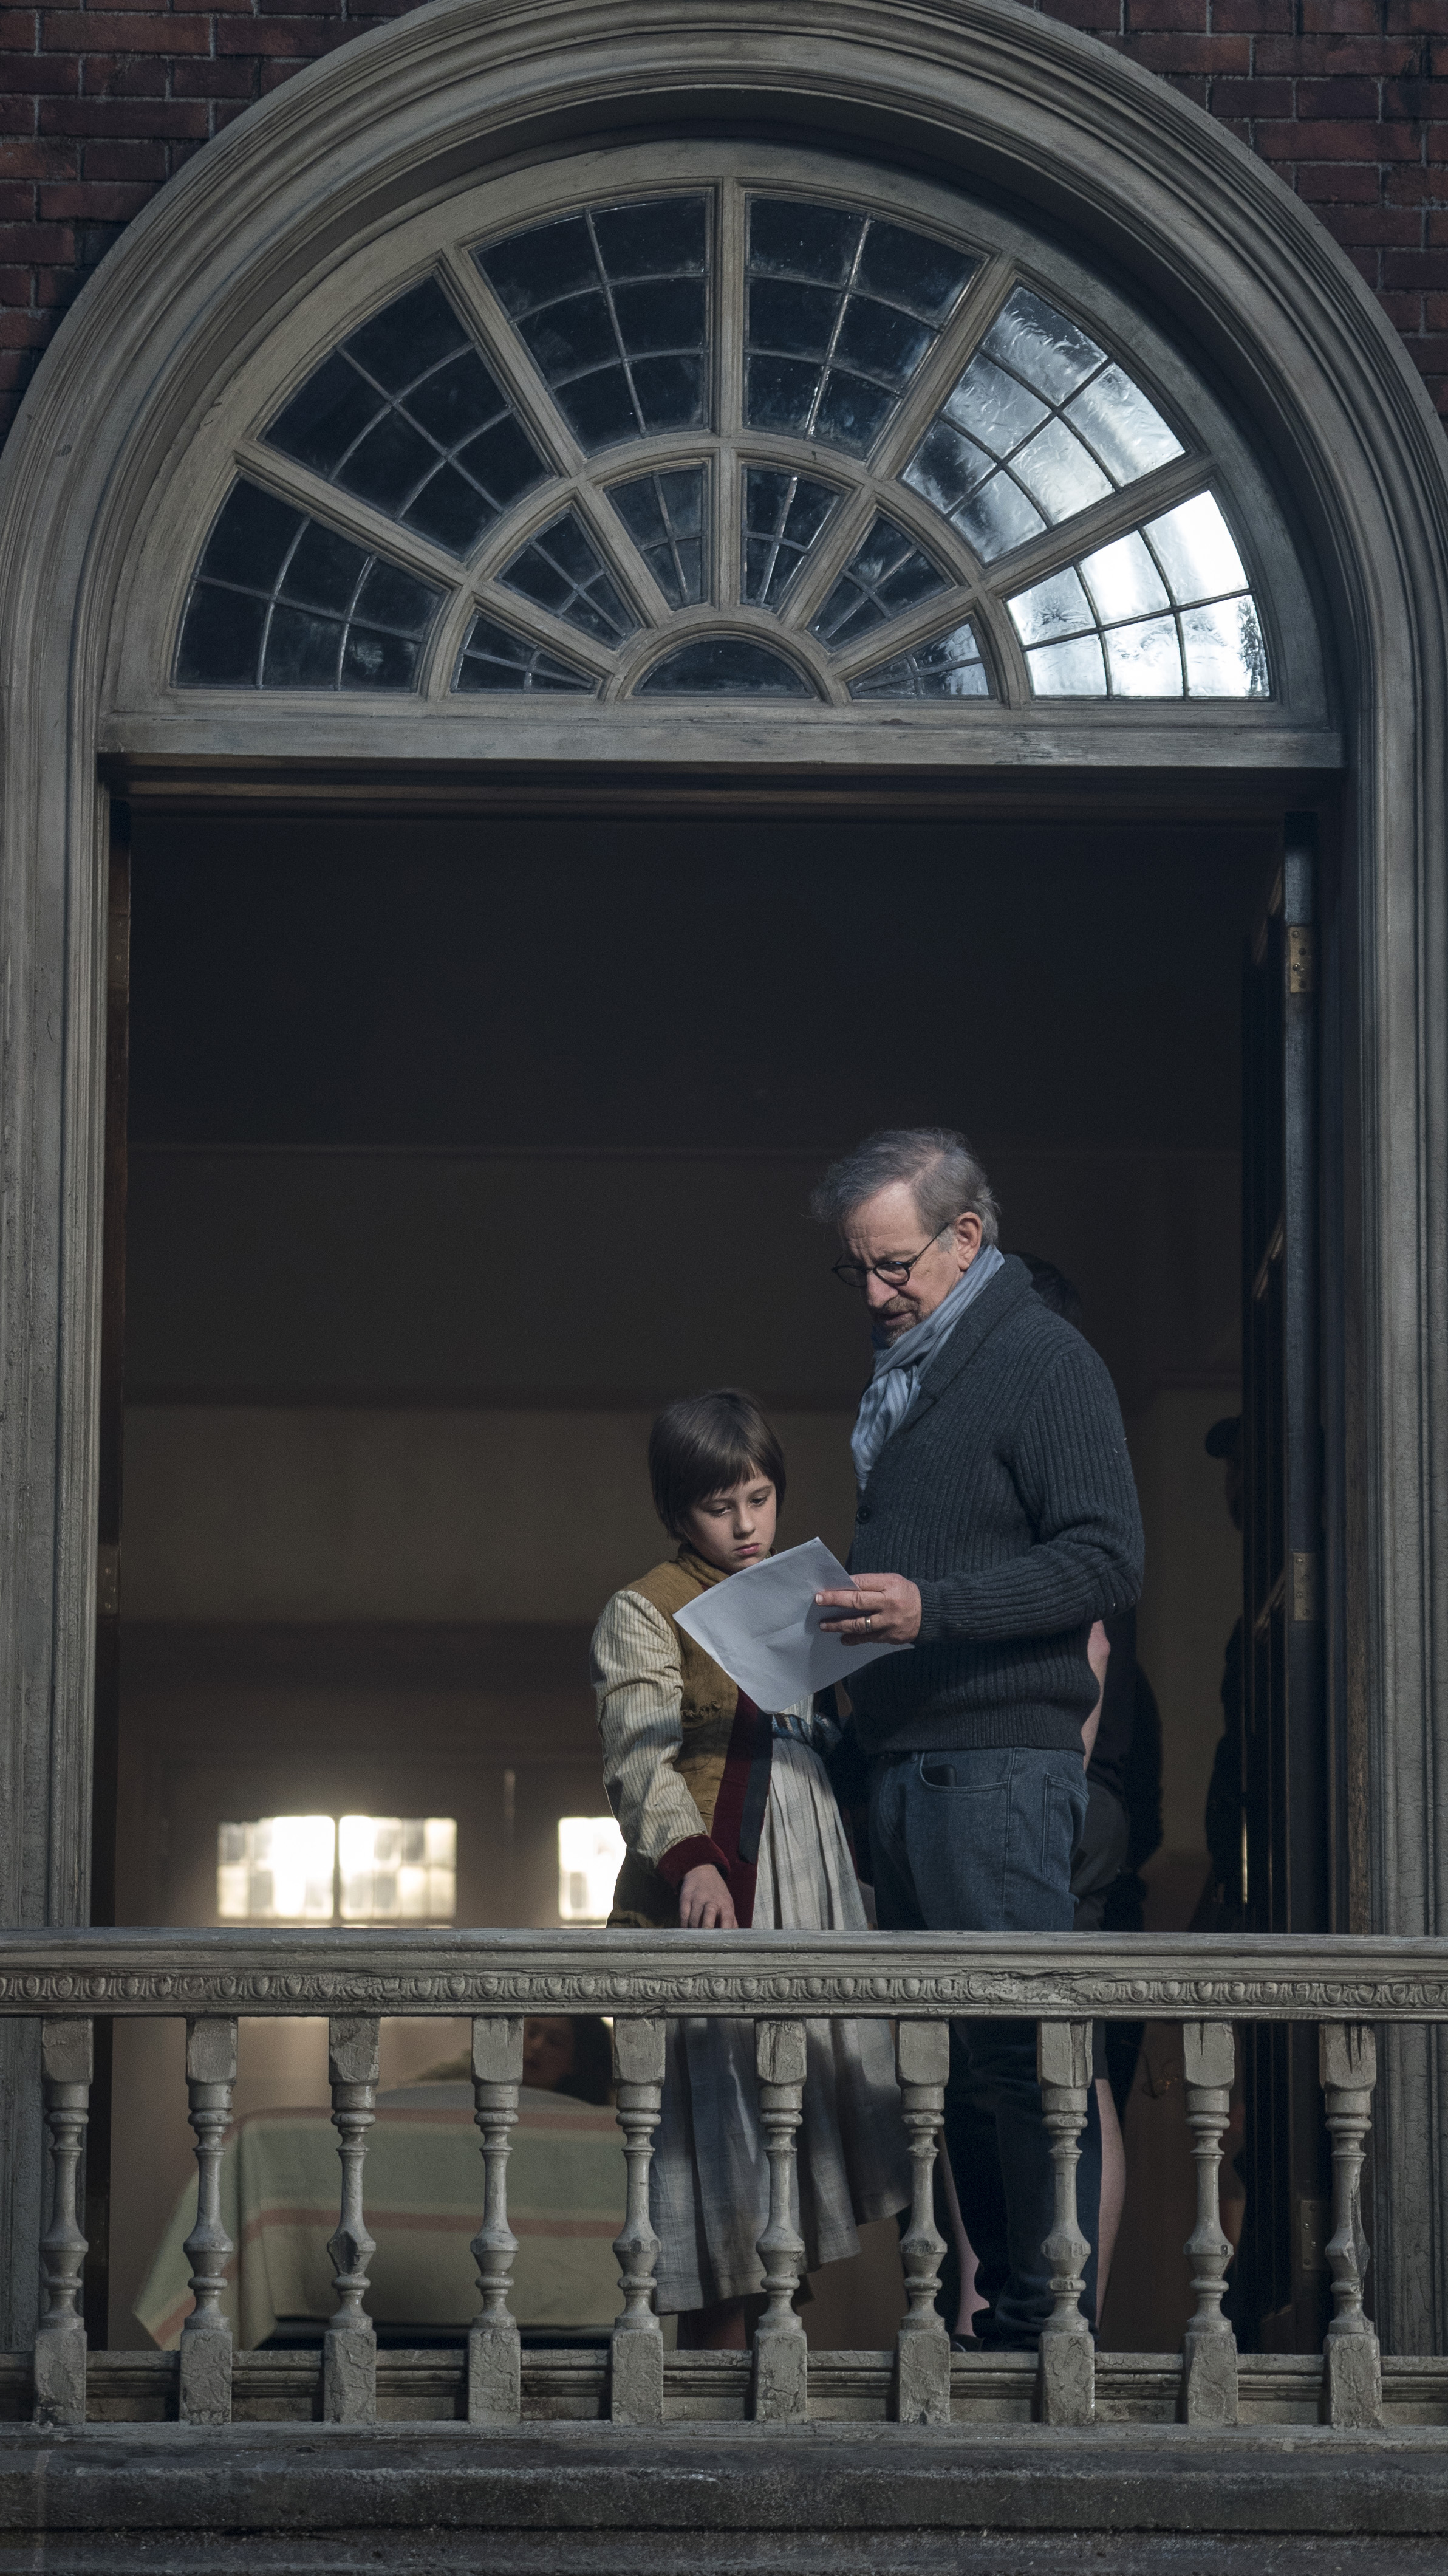 Director Steven Spielberg with Ruby Barnhill on the set of Disney's fantasy-adventure, THE BFG, directed by Steven Spielberg and based on the best-selling book by Roald Dahl.